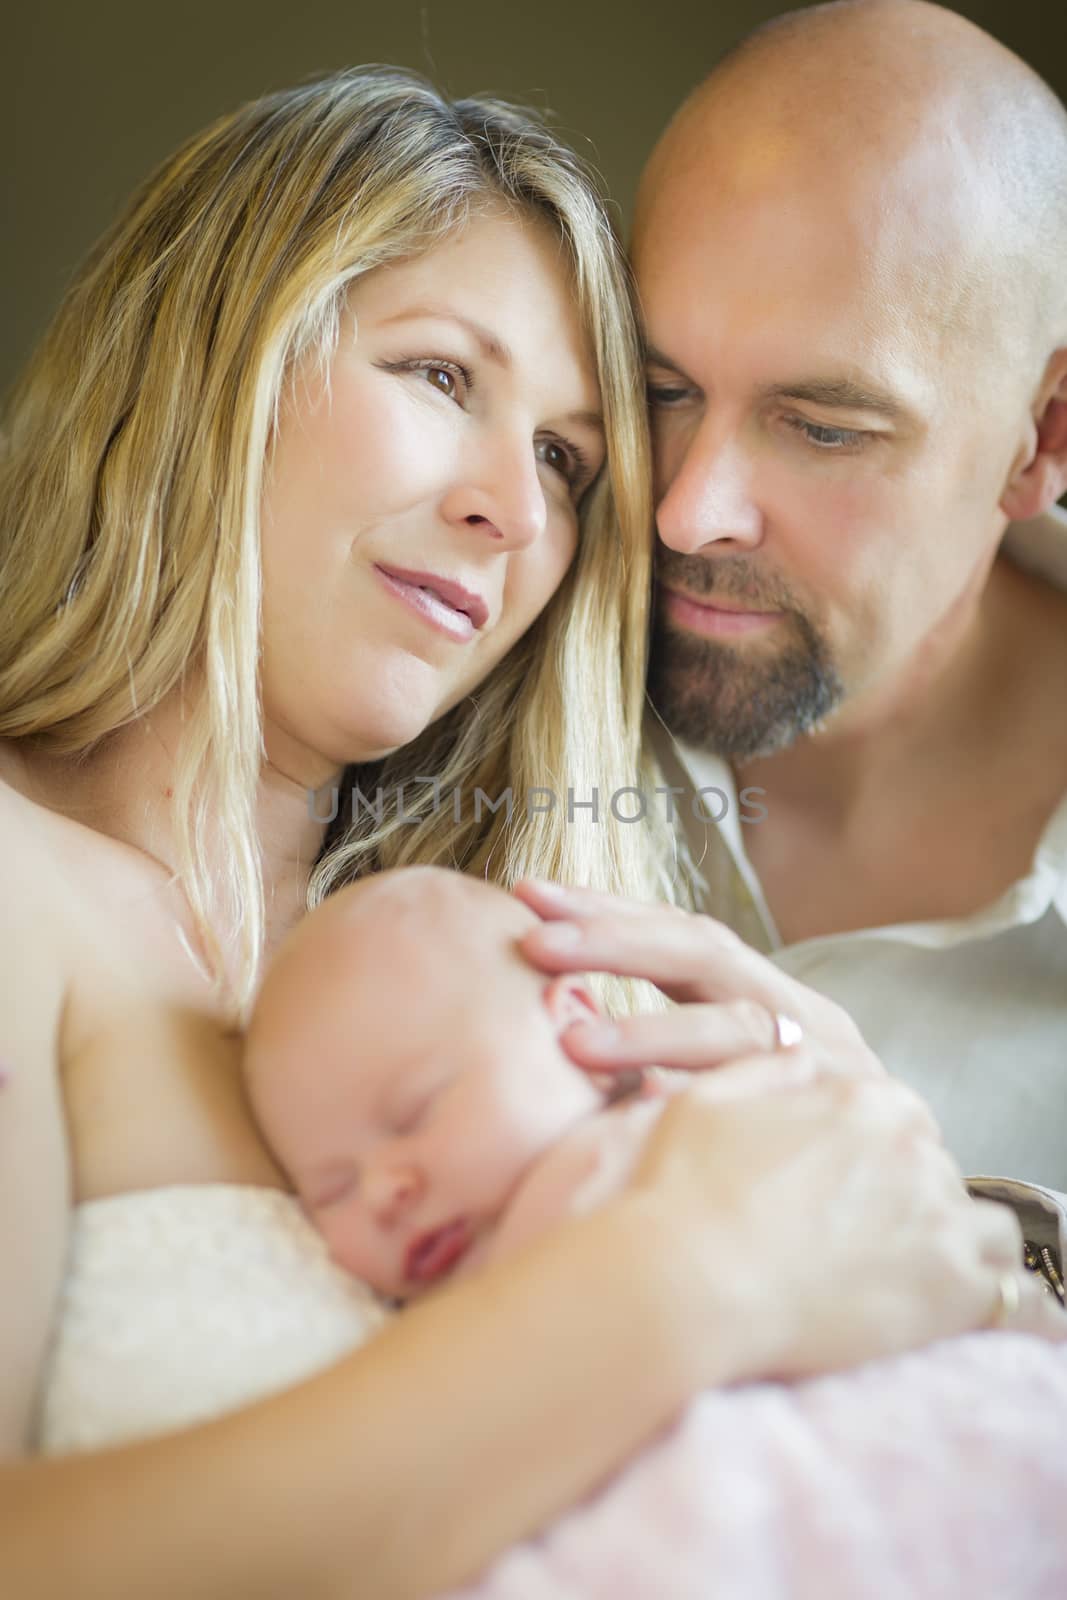 Beautiful Young Couple Holding Their Newborn Baby Girl by Feverpitched